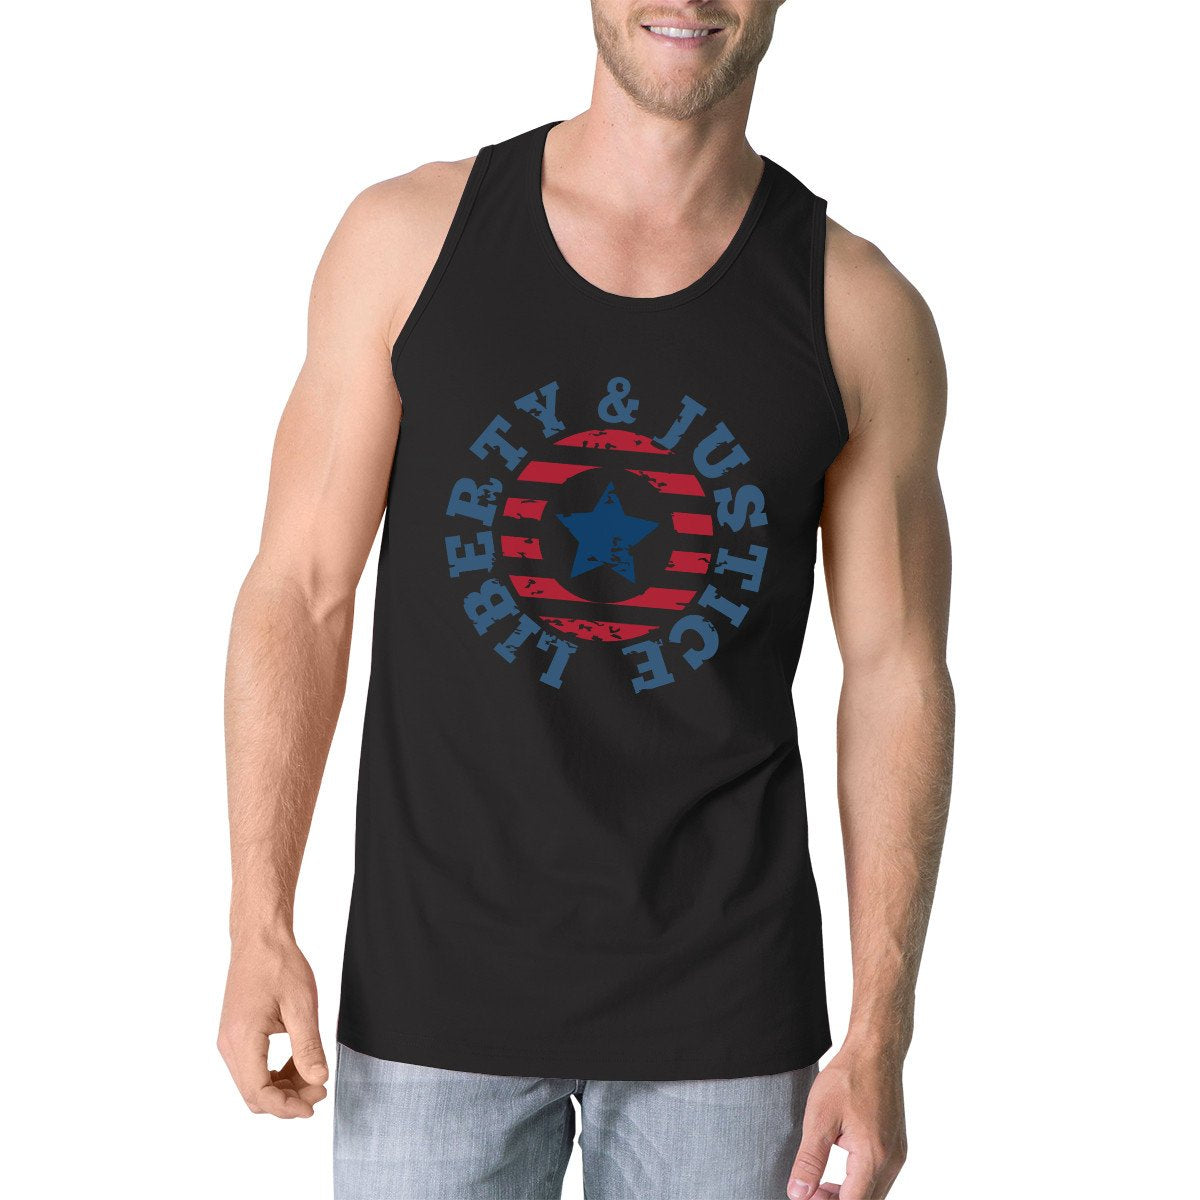 Liberty &amp; Justice Black Sleeveless Tee 4th Of July Tank Top For Men